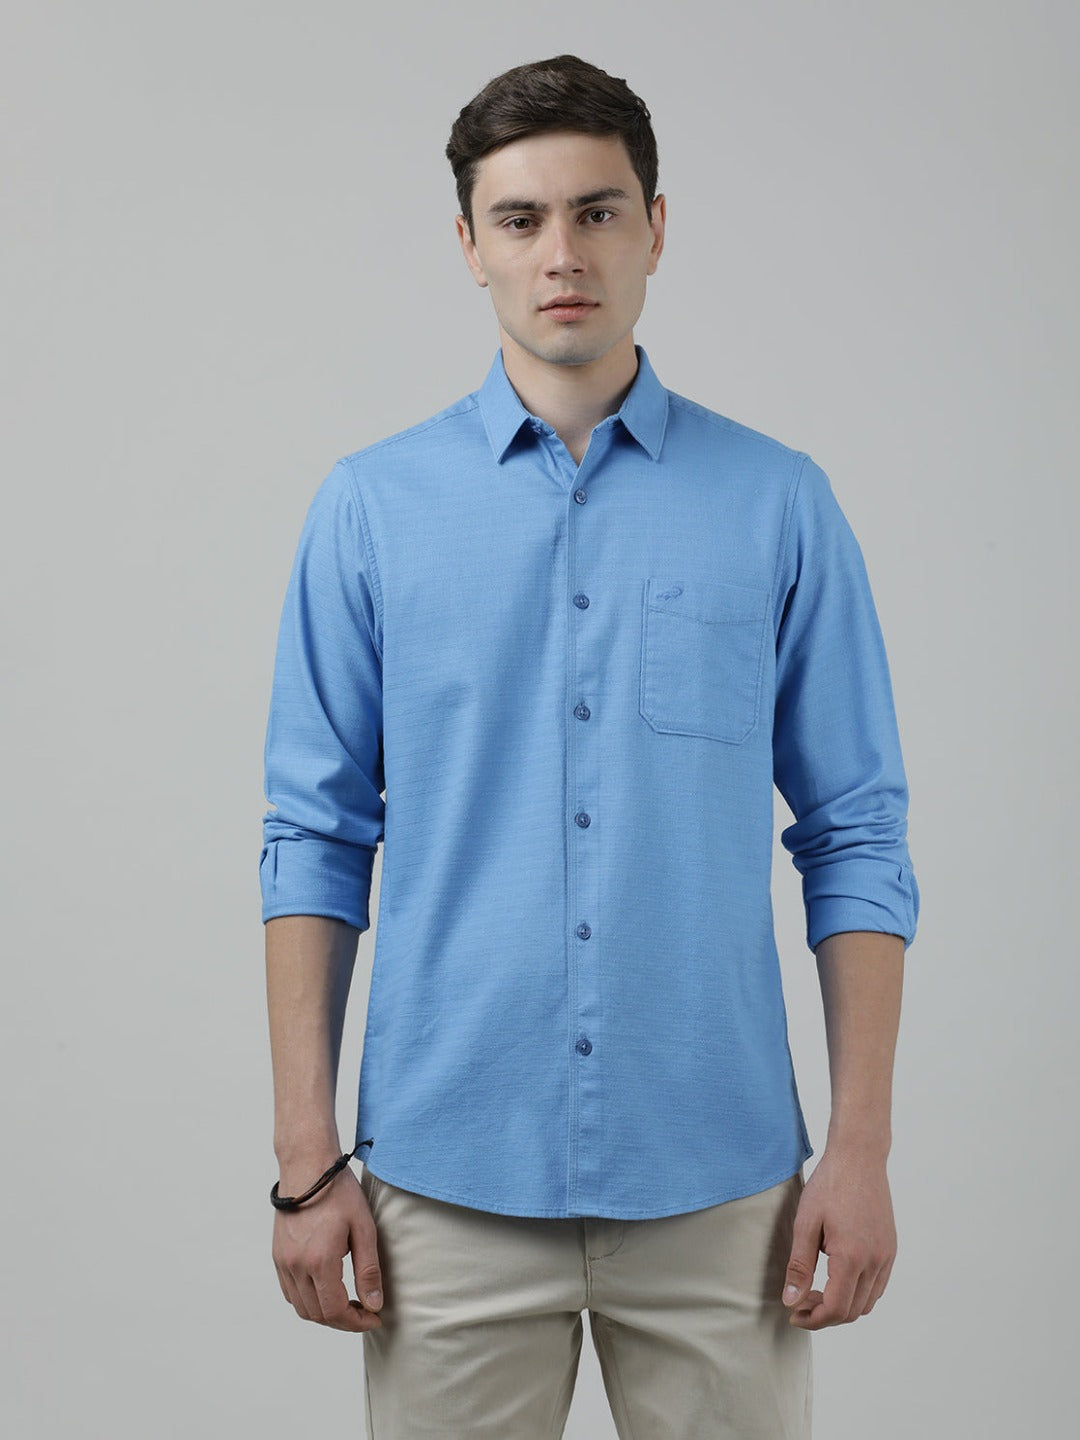 Casual Light Blue Full Sleeve Comfort Fit Solid Shirt with Collar for Men